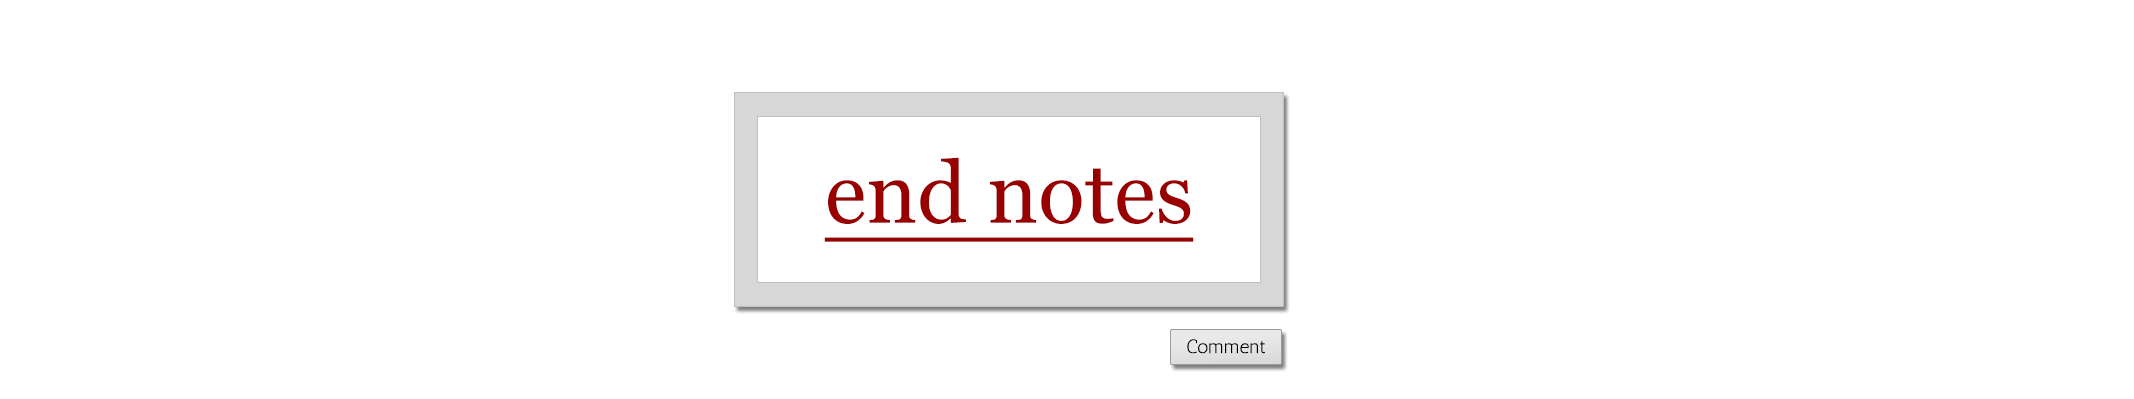 end notes